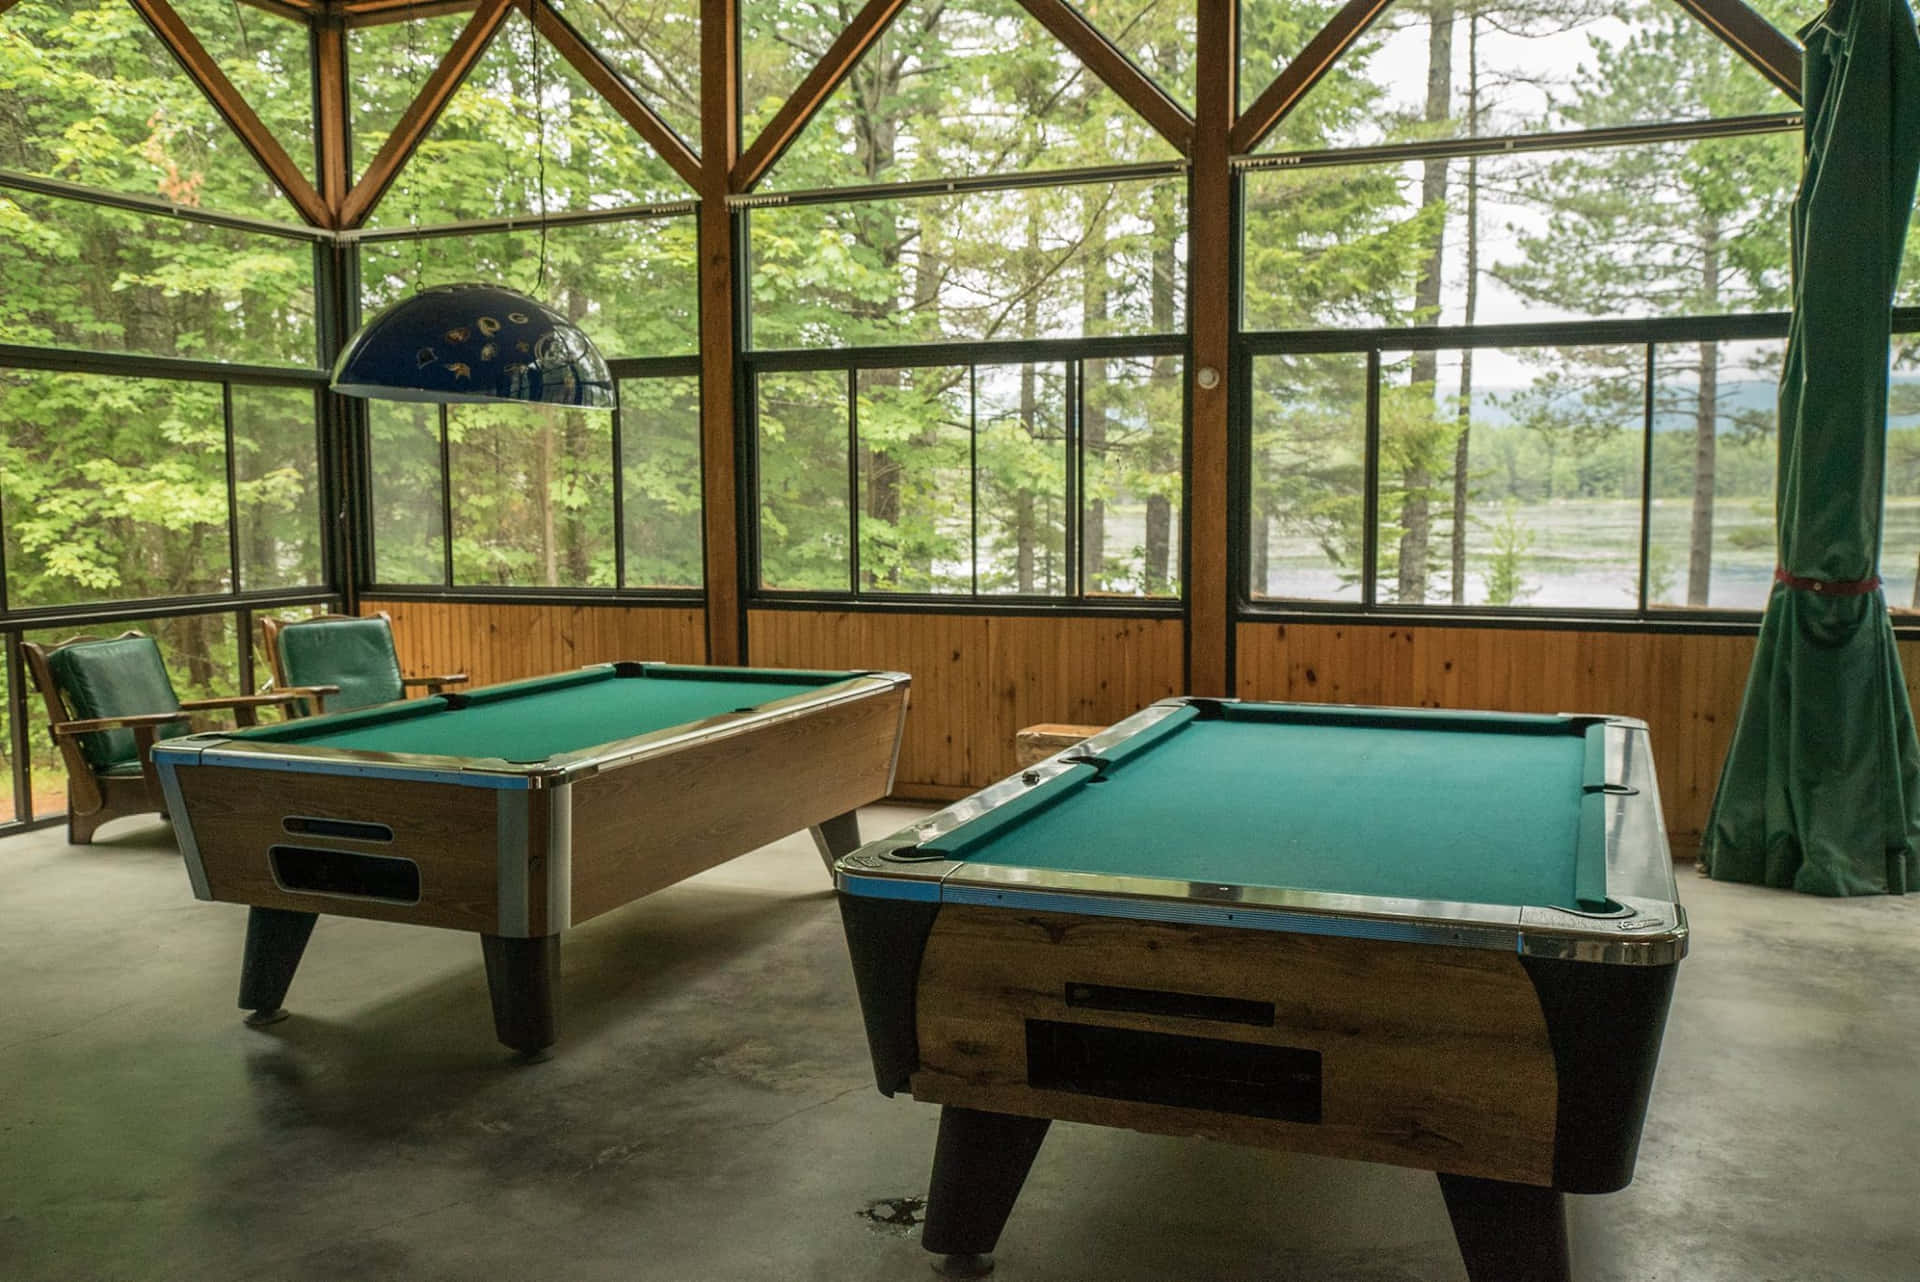 A high-end billiards table in an upscale pool lounge.